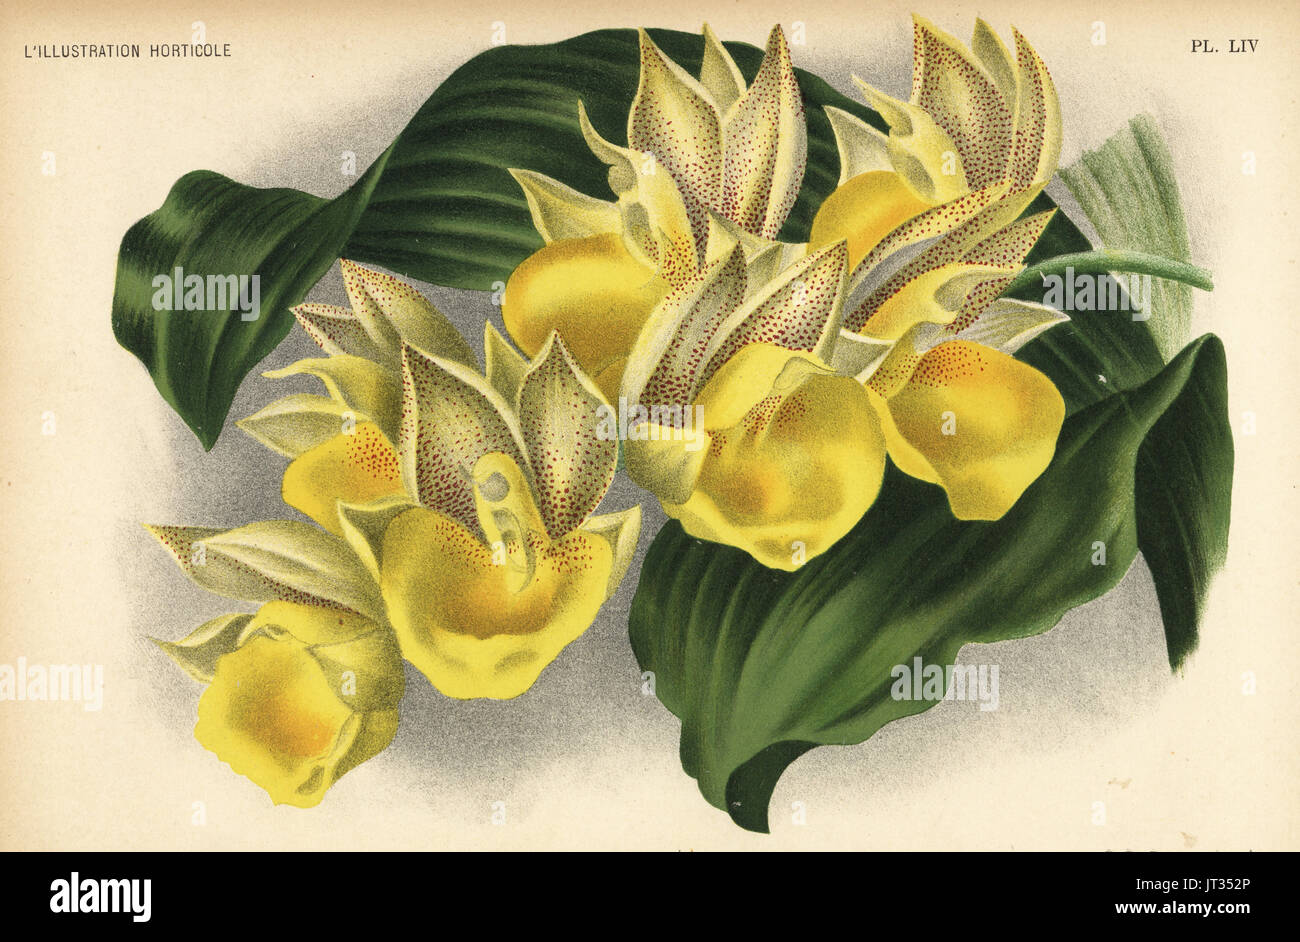 Catasetum × tapiriceps orchid (Catasetum splendens auro-maculatum). Chromolithograph by Pieter de Pannemaeker after an illustration by A. Goossens from Jean Linden's l'Illustration Horticole, Brussels, 1896. Stock Photo